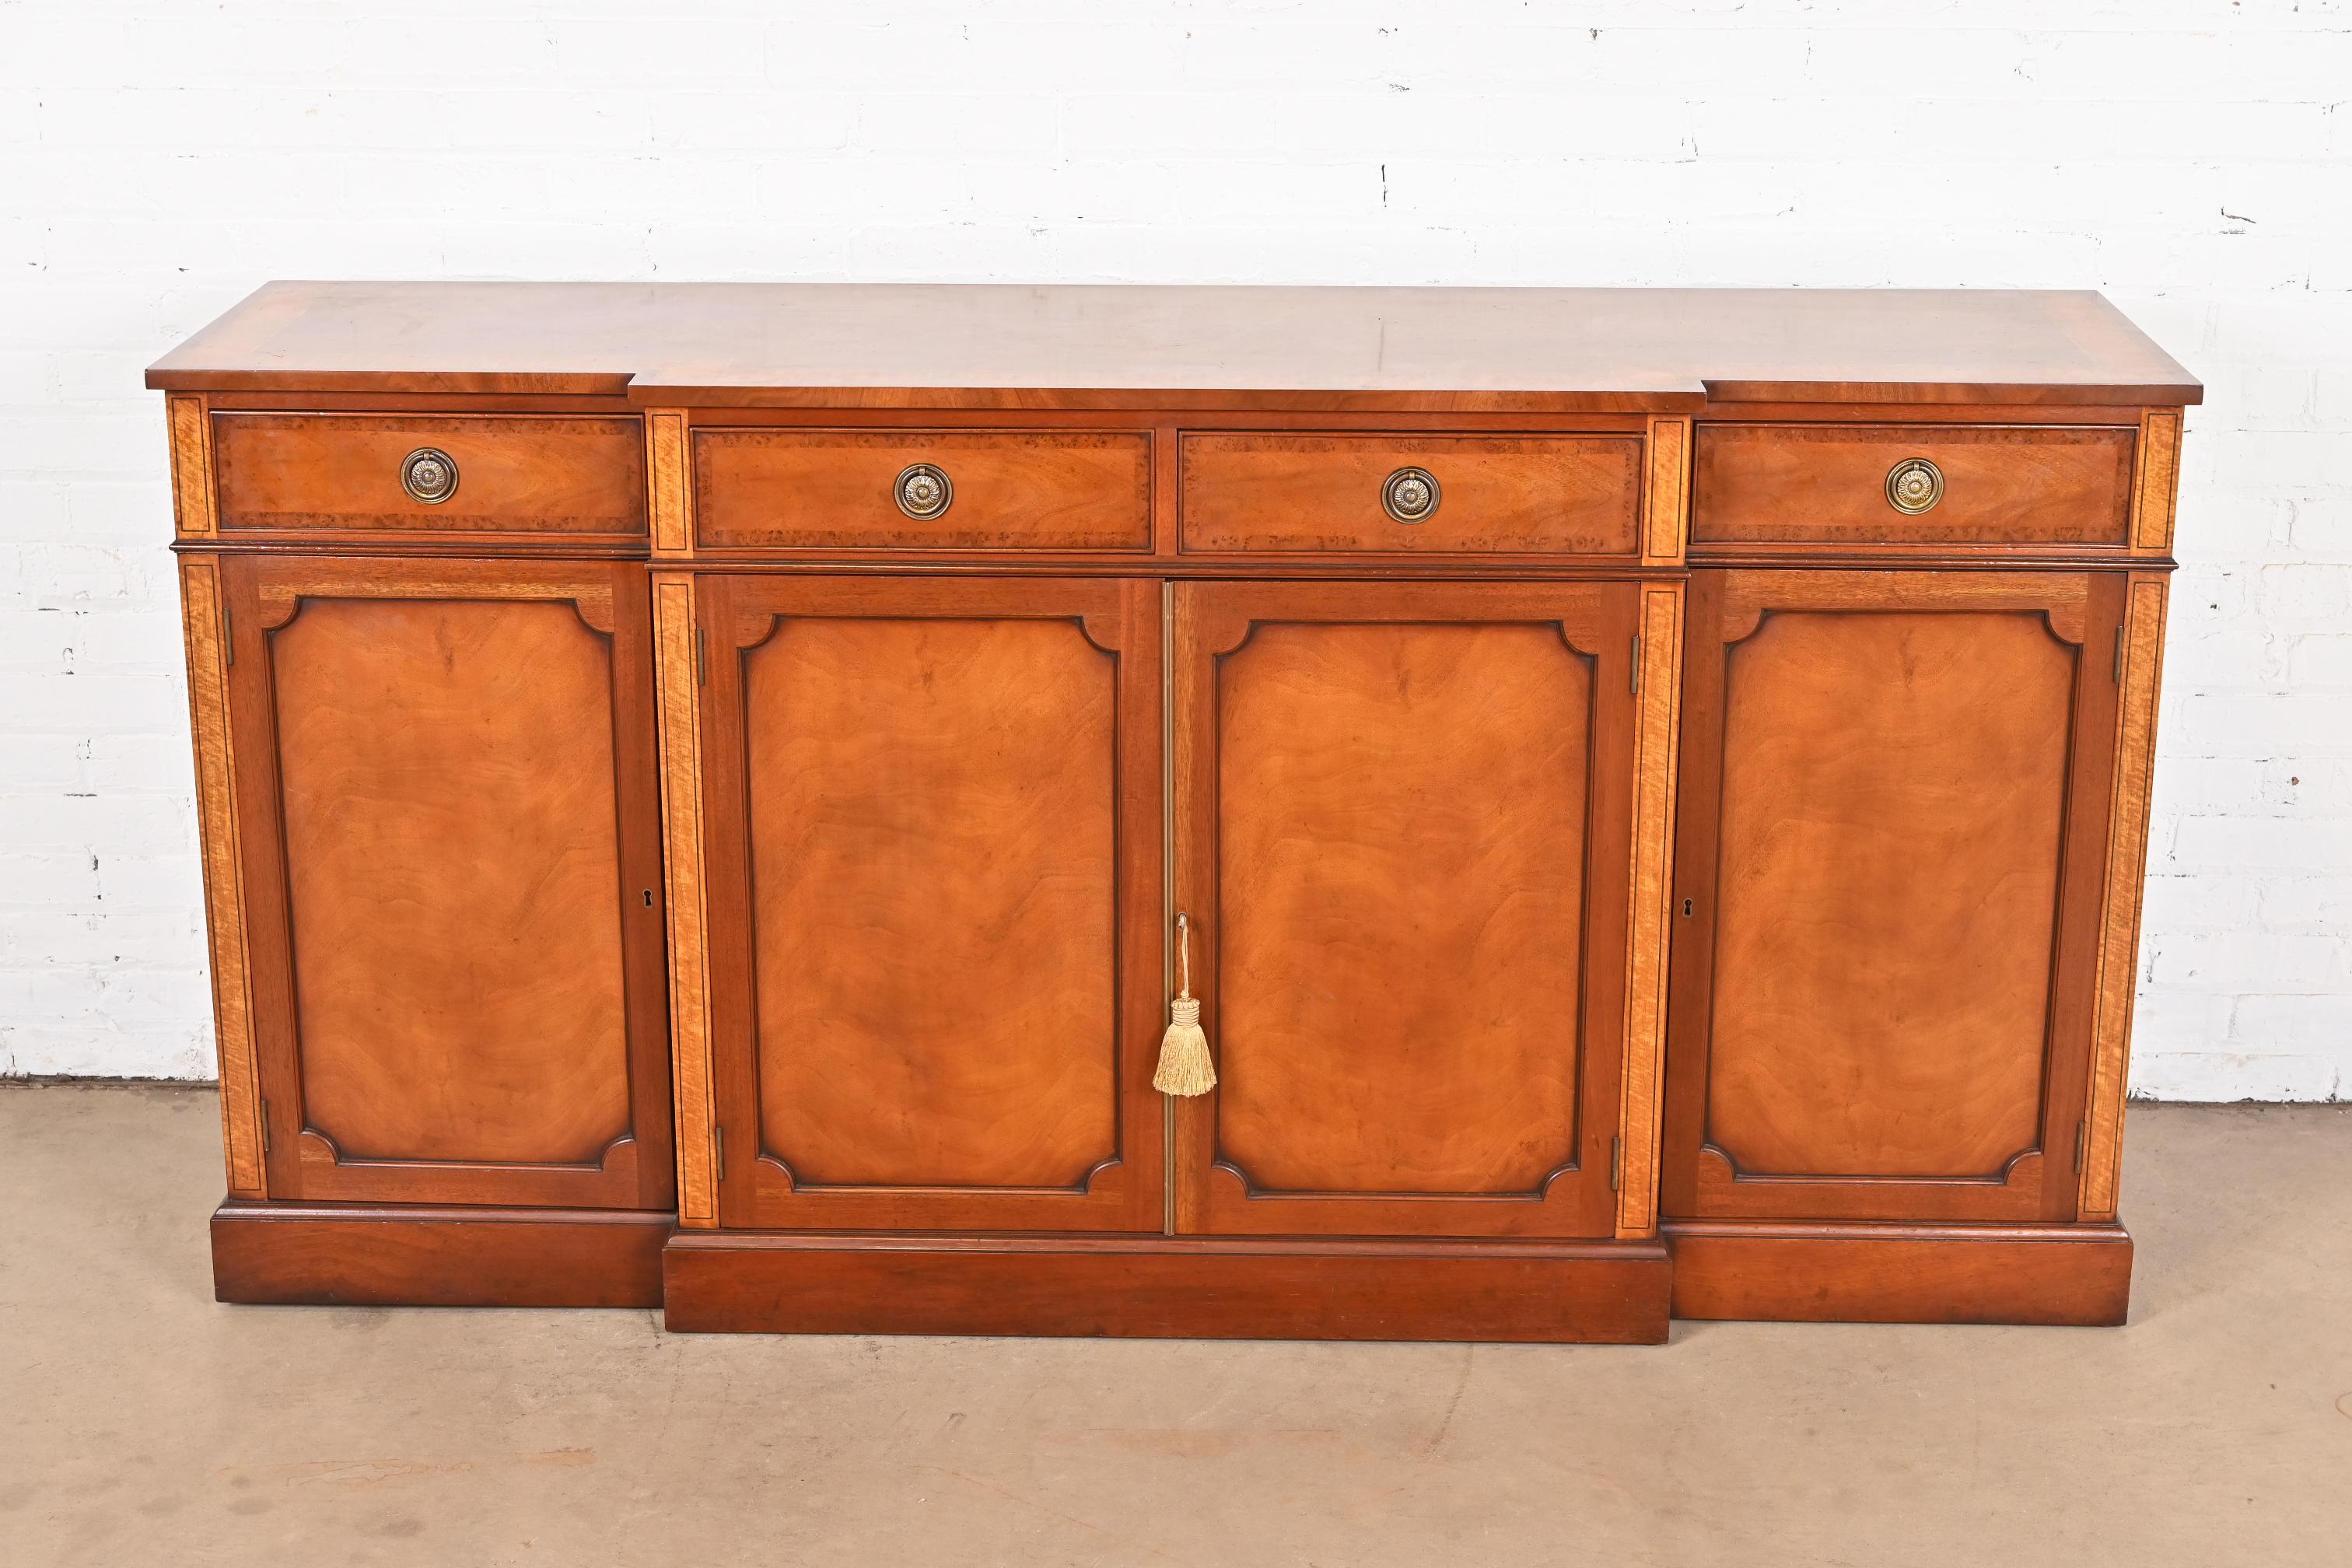 English Georgian Banded Mahogany Sideboard by Restall Brown & Clennell In Good Condition For Sale In South Bend, IN